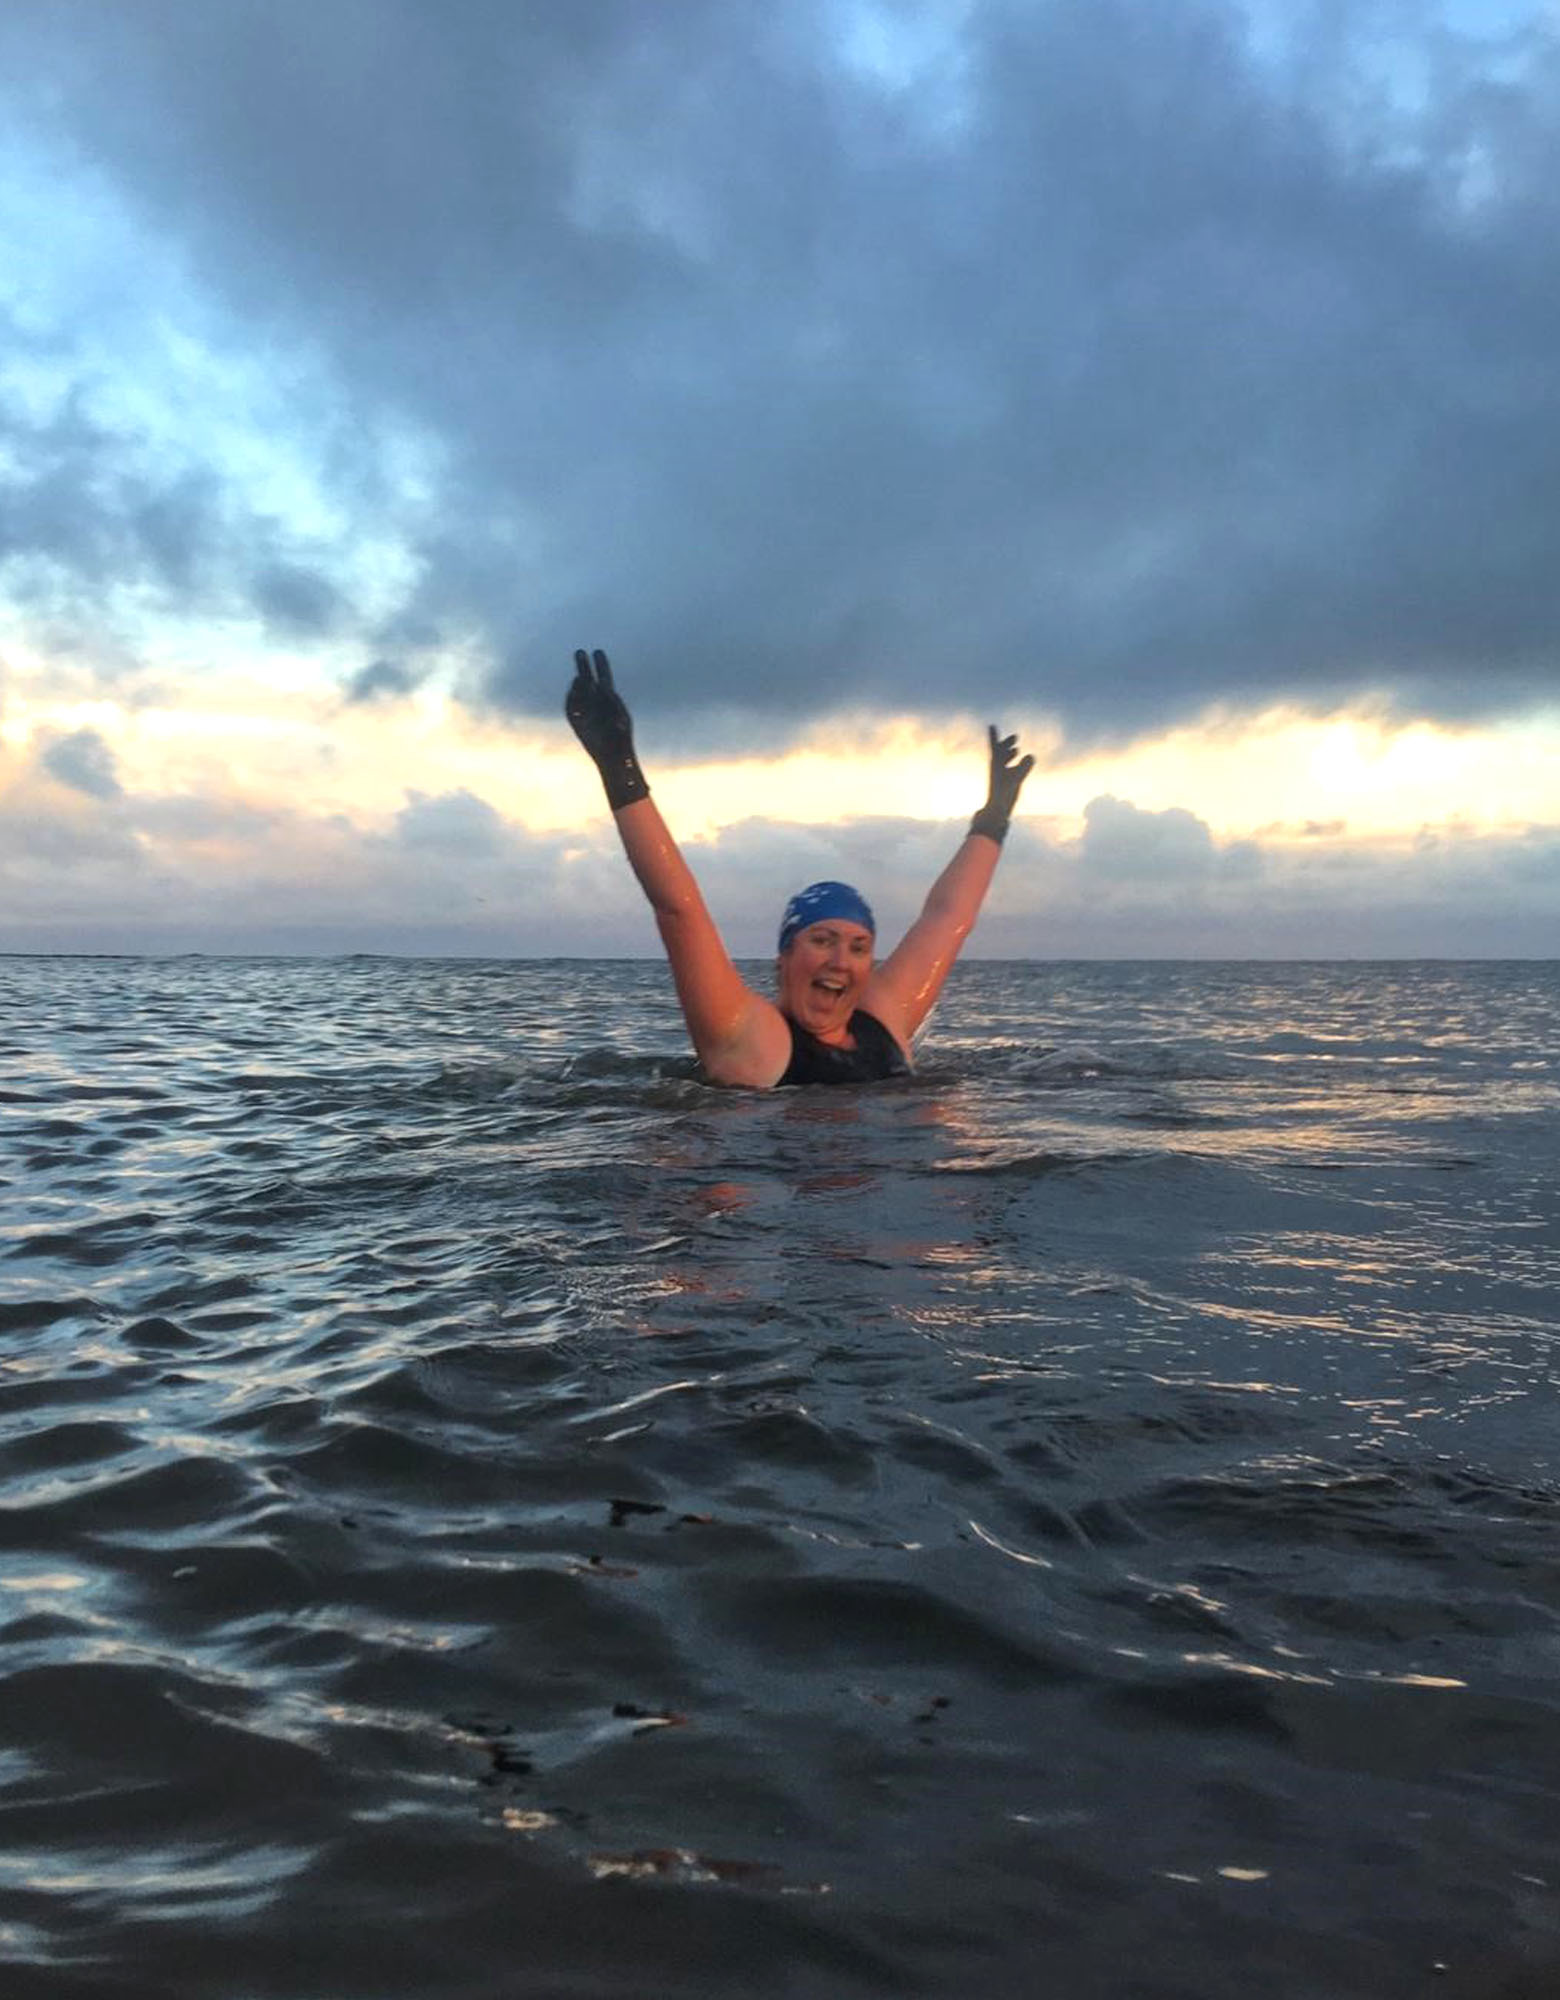 Clare Jones, who suffered a head injury in a freak accident on a swing, will be doing a Dip a Day for a month in the North Sea to raise funds for the Samaritans.